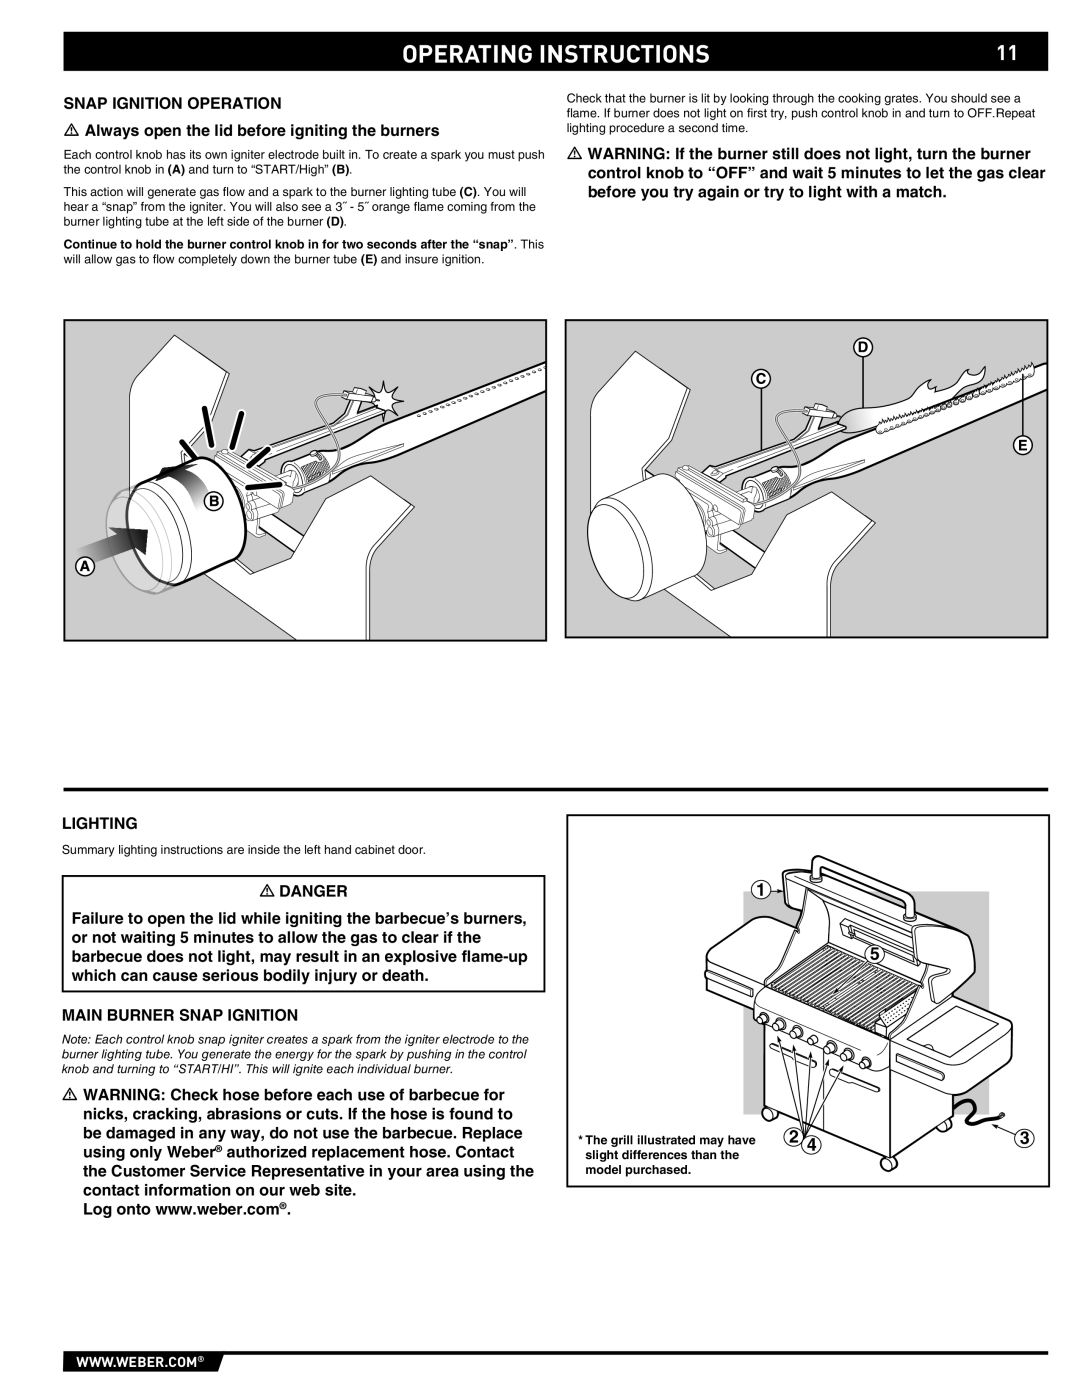 Weber S-470TM manual Operating Instructions, The grill illustrated may have, slight differences than the, model purchased 